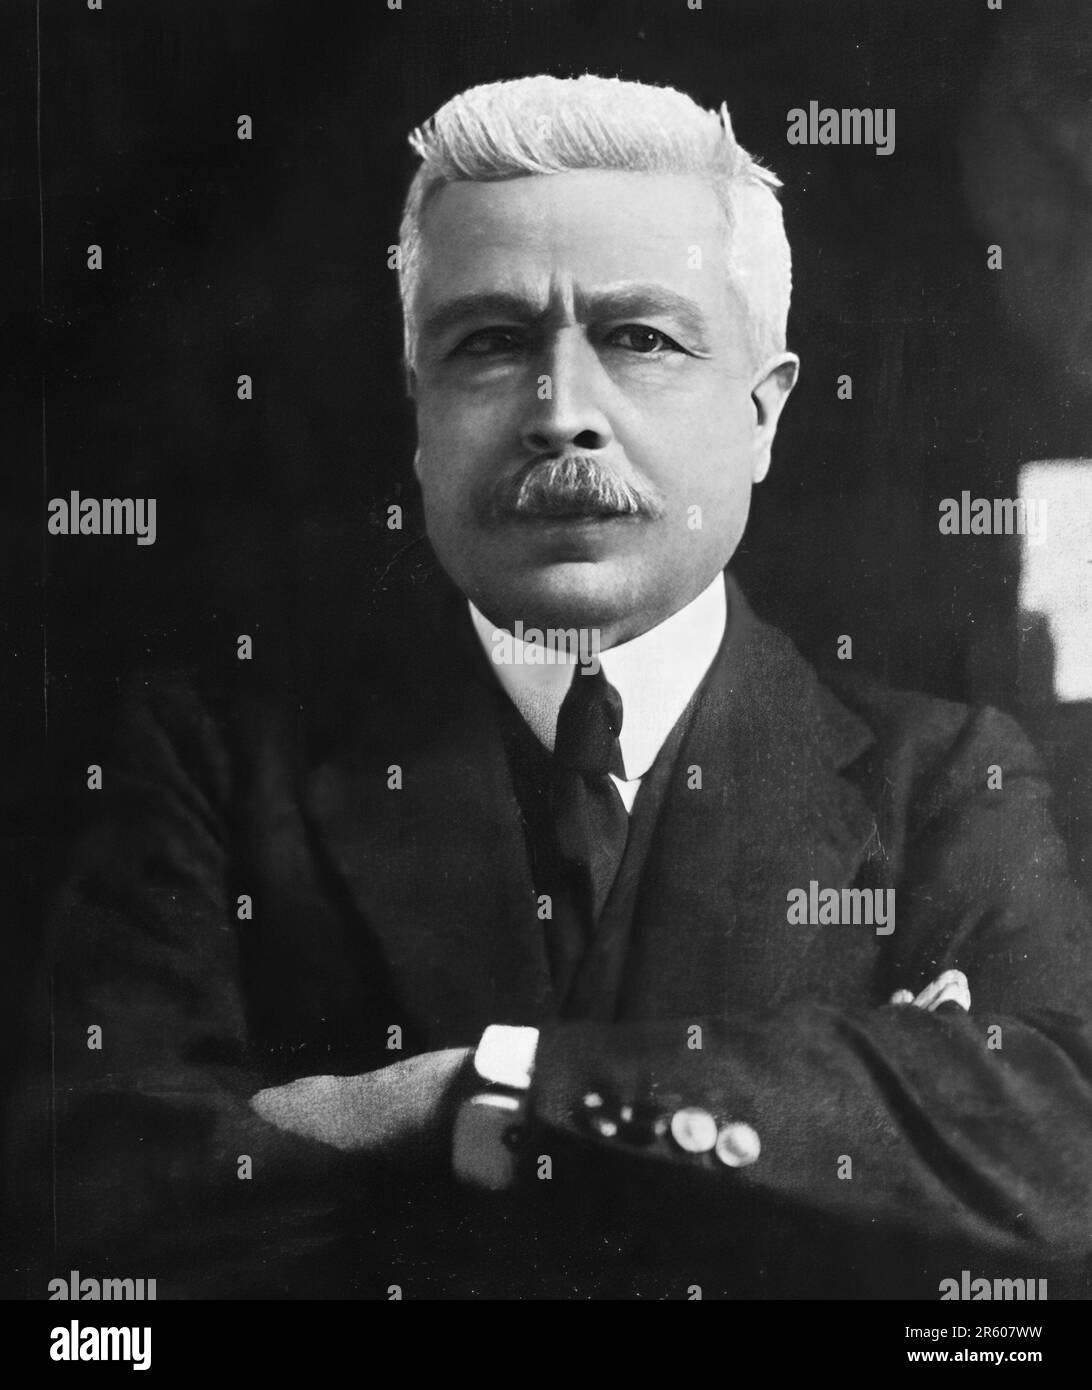 Vittorio Emanuele Orlando was a prominent Italian politician and statesman who played a key role in the First World War and the post-war Stock Photo